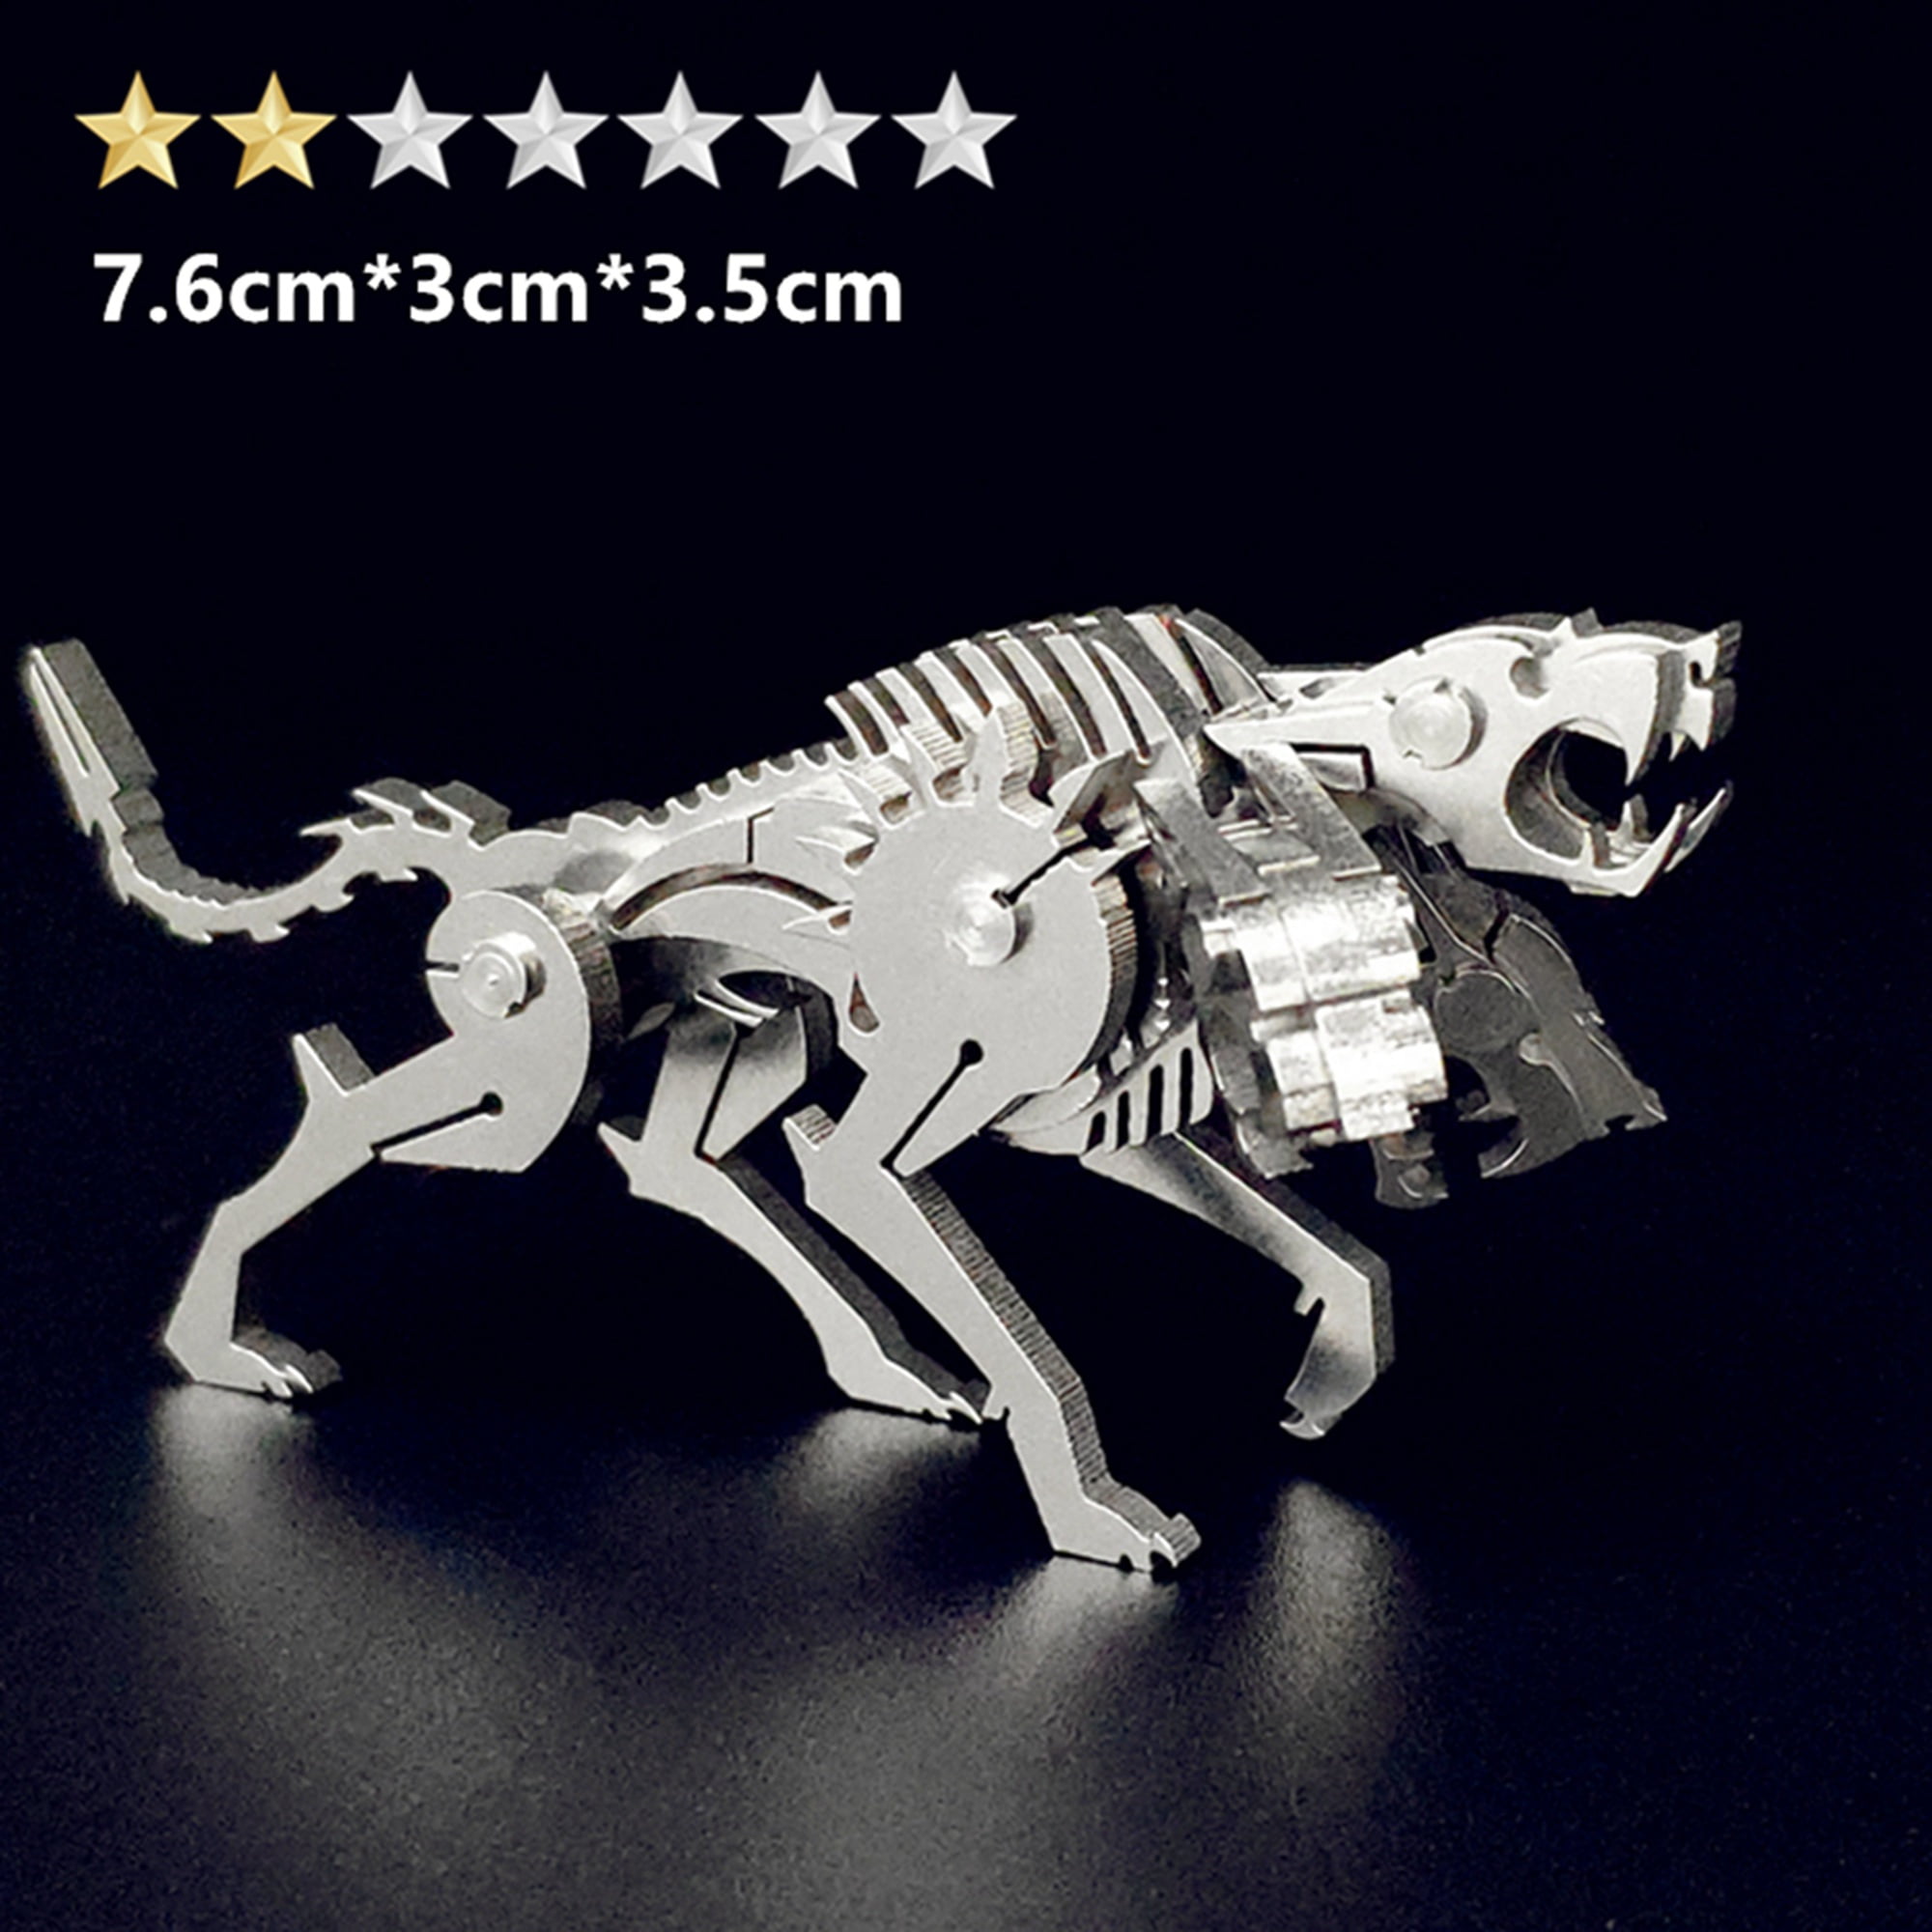 3D Griffin Stainless Steel Skeleton Puzzle Joint Mobility Miniature Model Kits Puzzle Toys